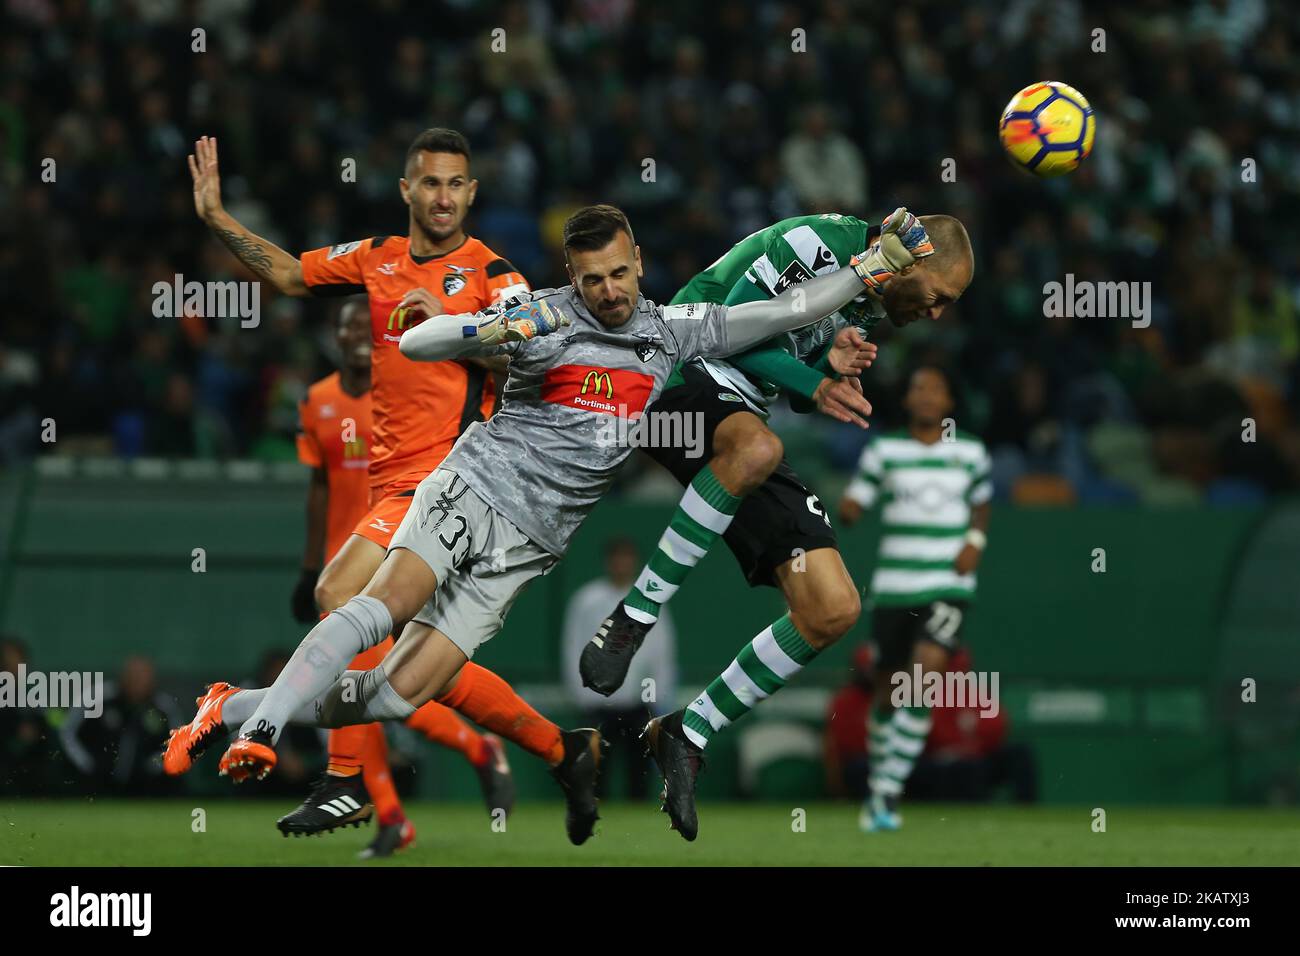 Portimonense's goalkeeper Ricardo Ferreira (L) and Sportings forward Bas Dost from Holland (R) during Premier League 2017/18 match between Sporting CP and Portimonense SC, at Alvalade Stadium in Lisbon on December 17, 2017. (Photo by Bruno Barros / DPI / NurPhoto)  Stock Photo